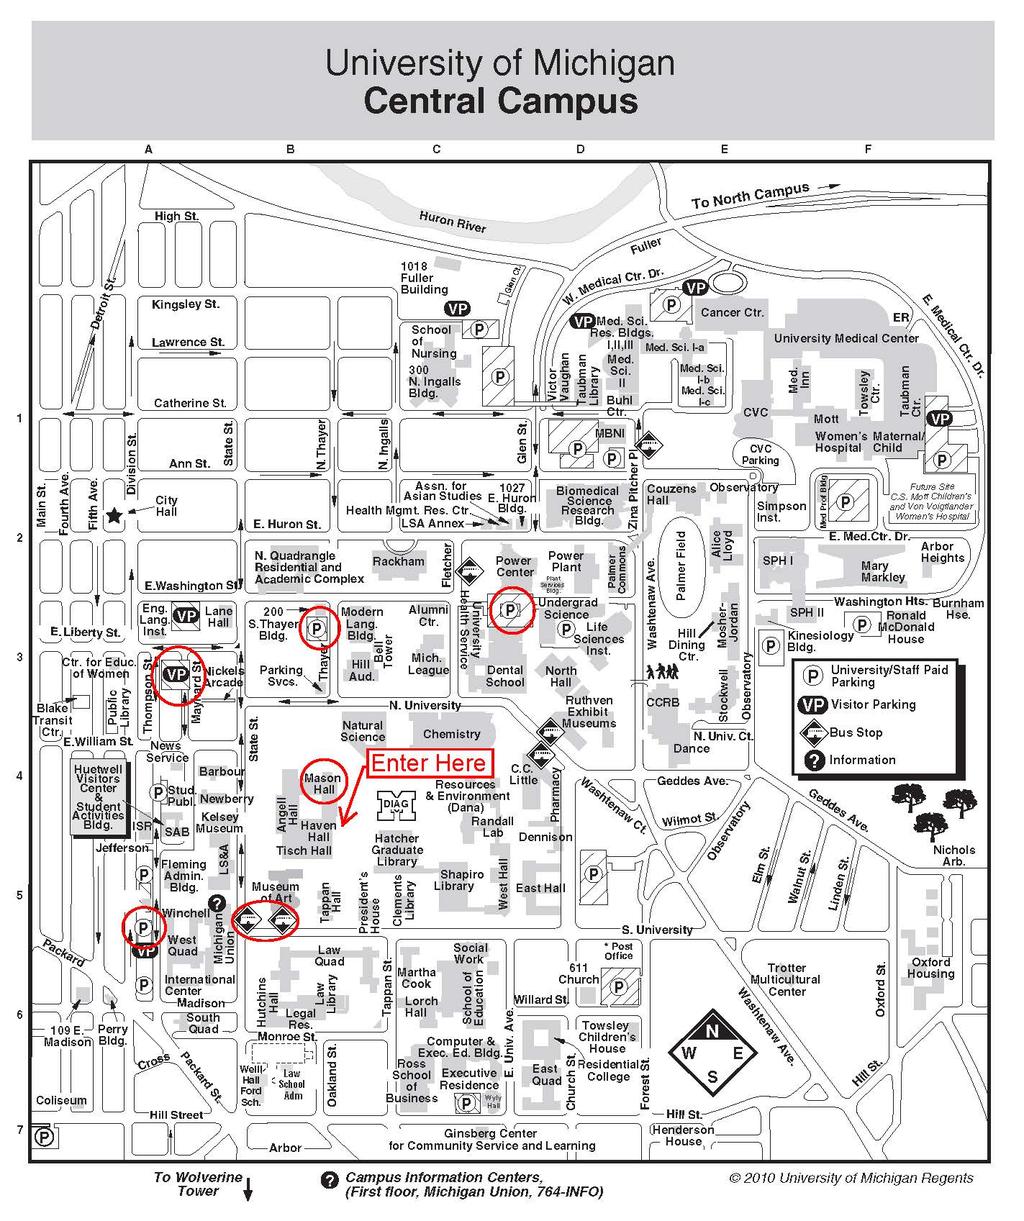 Campus Map for JLPT: Contact: Please direct all questions and inquiries to: American